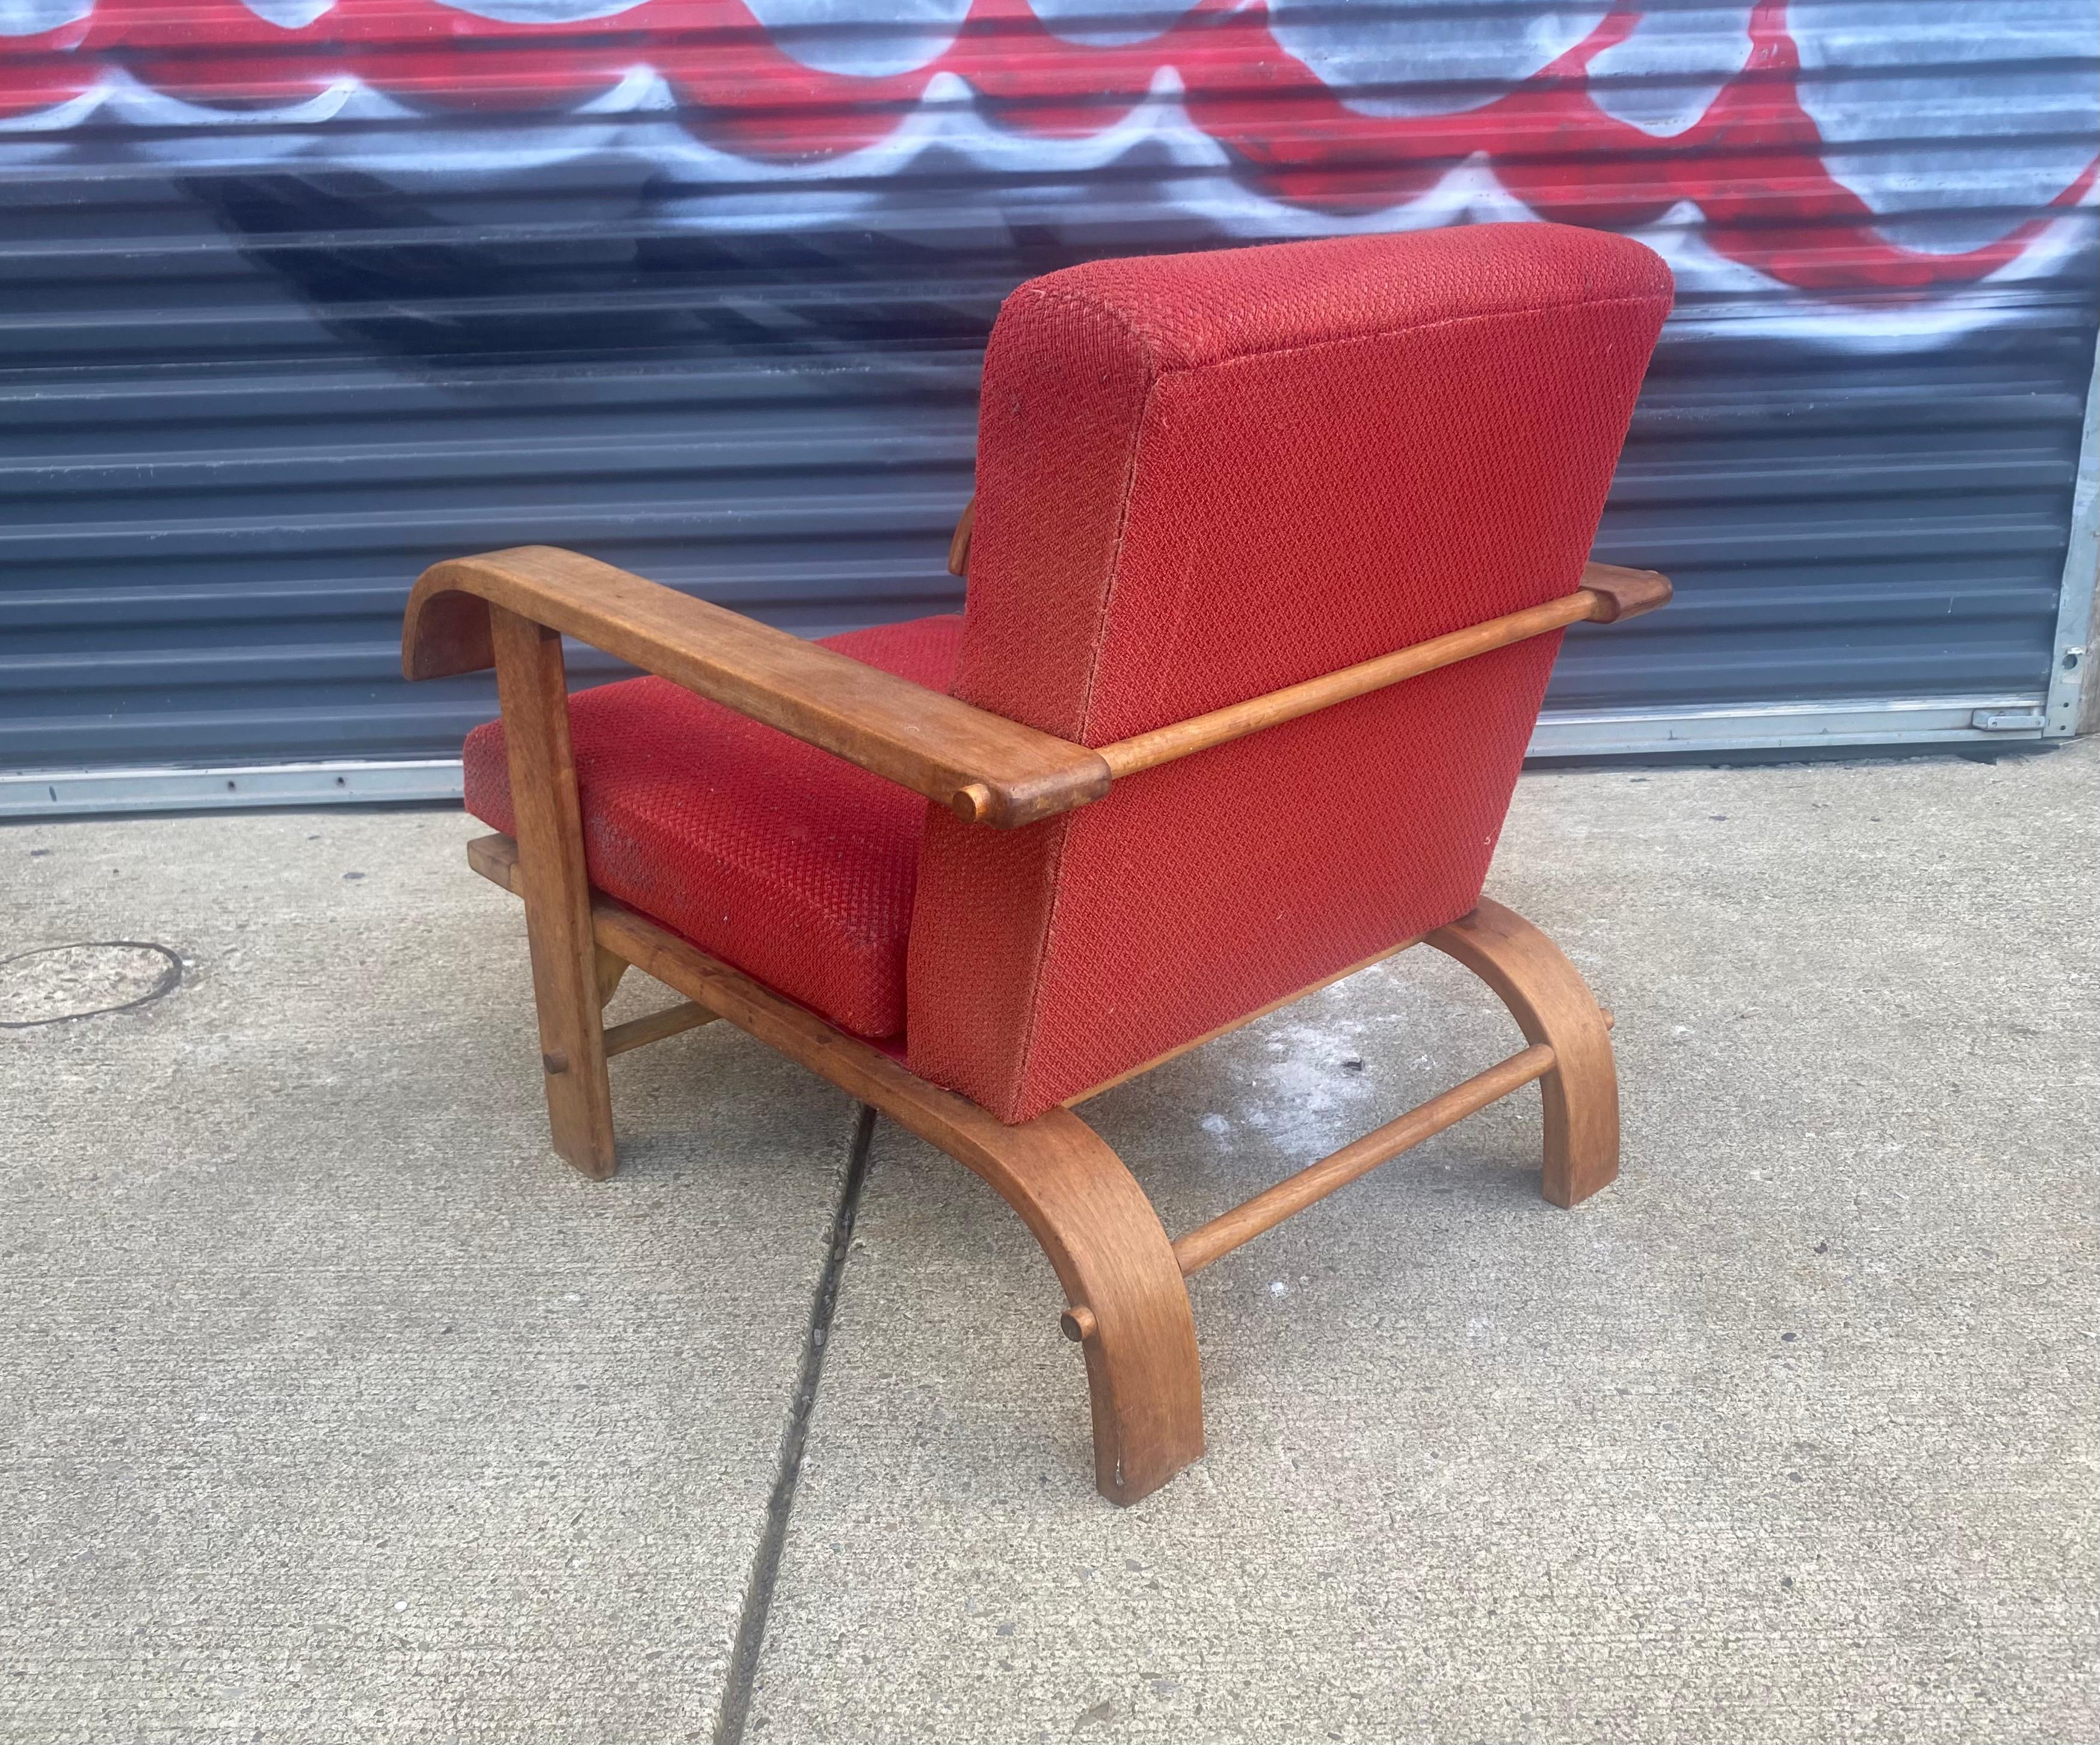 Mid-20th Century Russel Wright Easy Chair for Conant Ball's, American Modern, 1935 For Sale